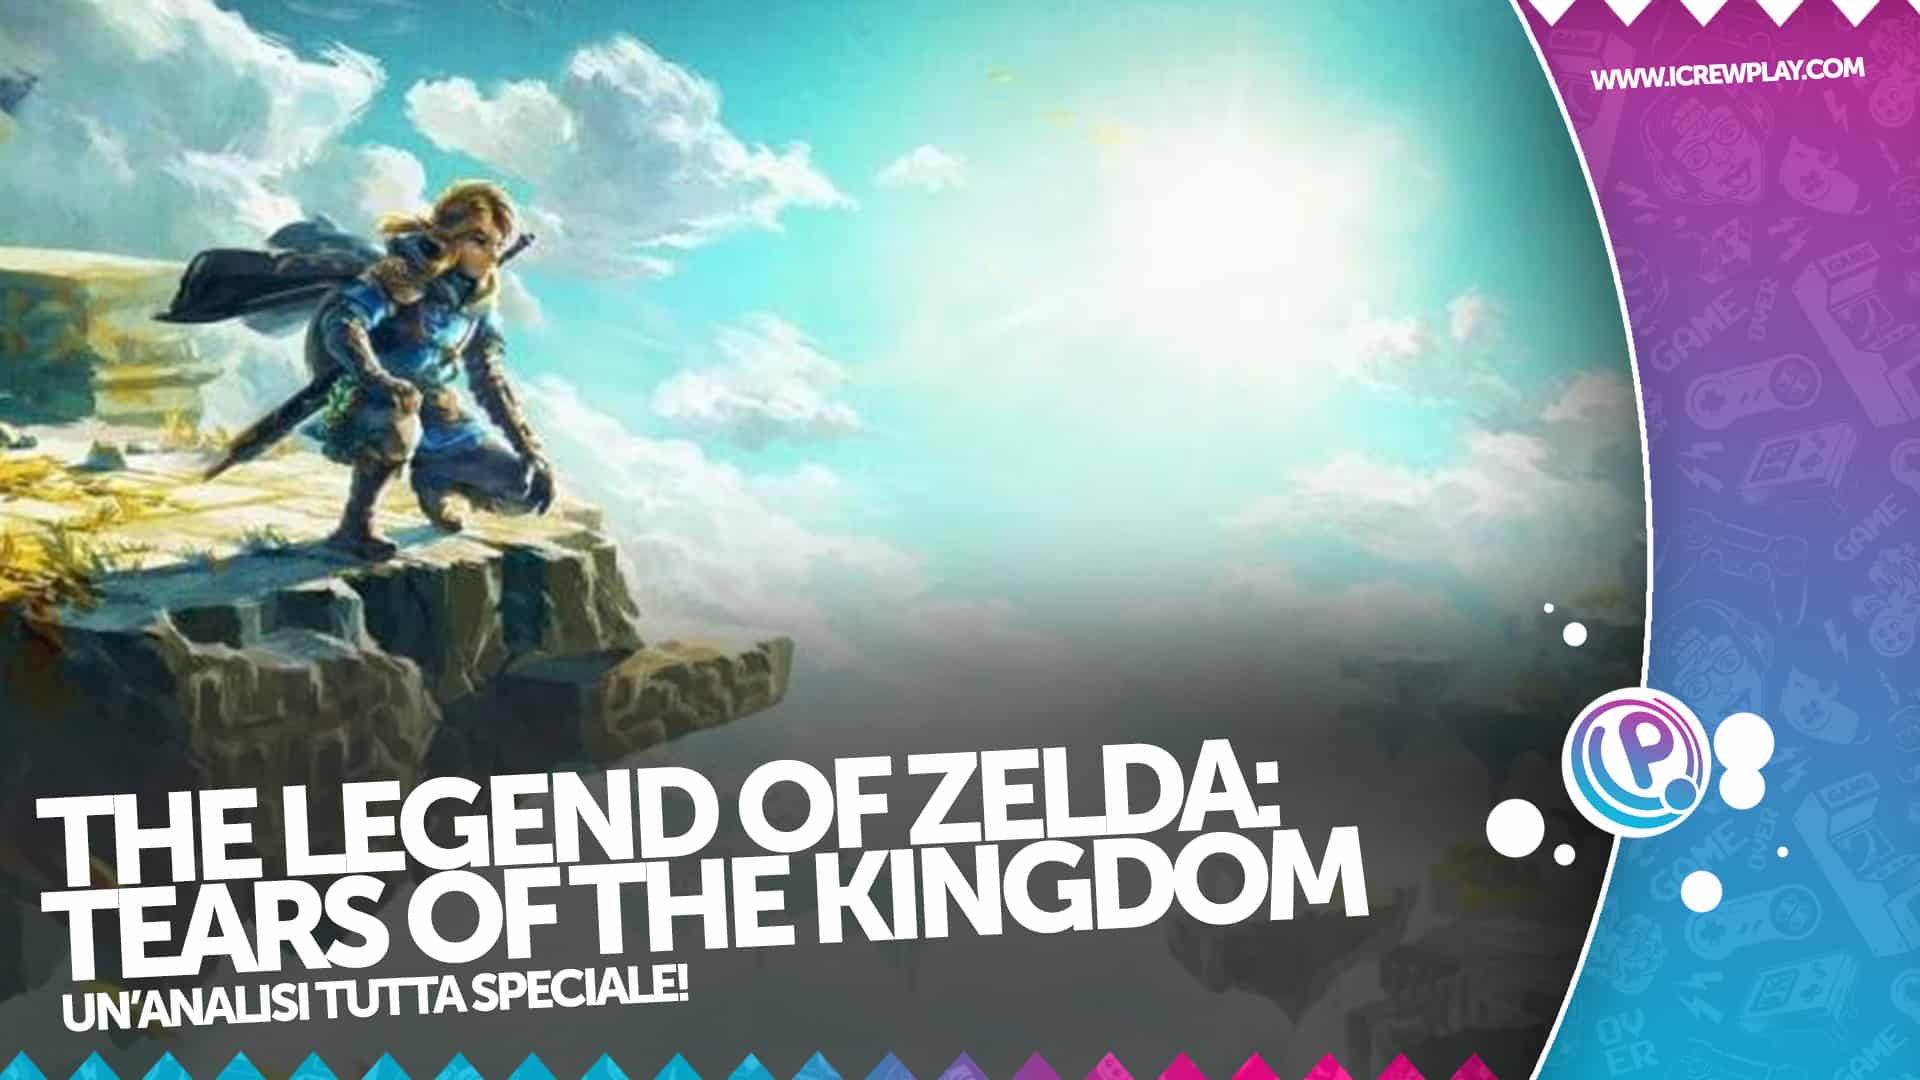 Analisi di The Legend of Zelda Tears of The Kingdom 14